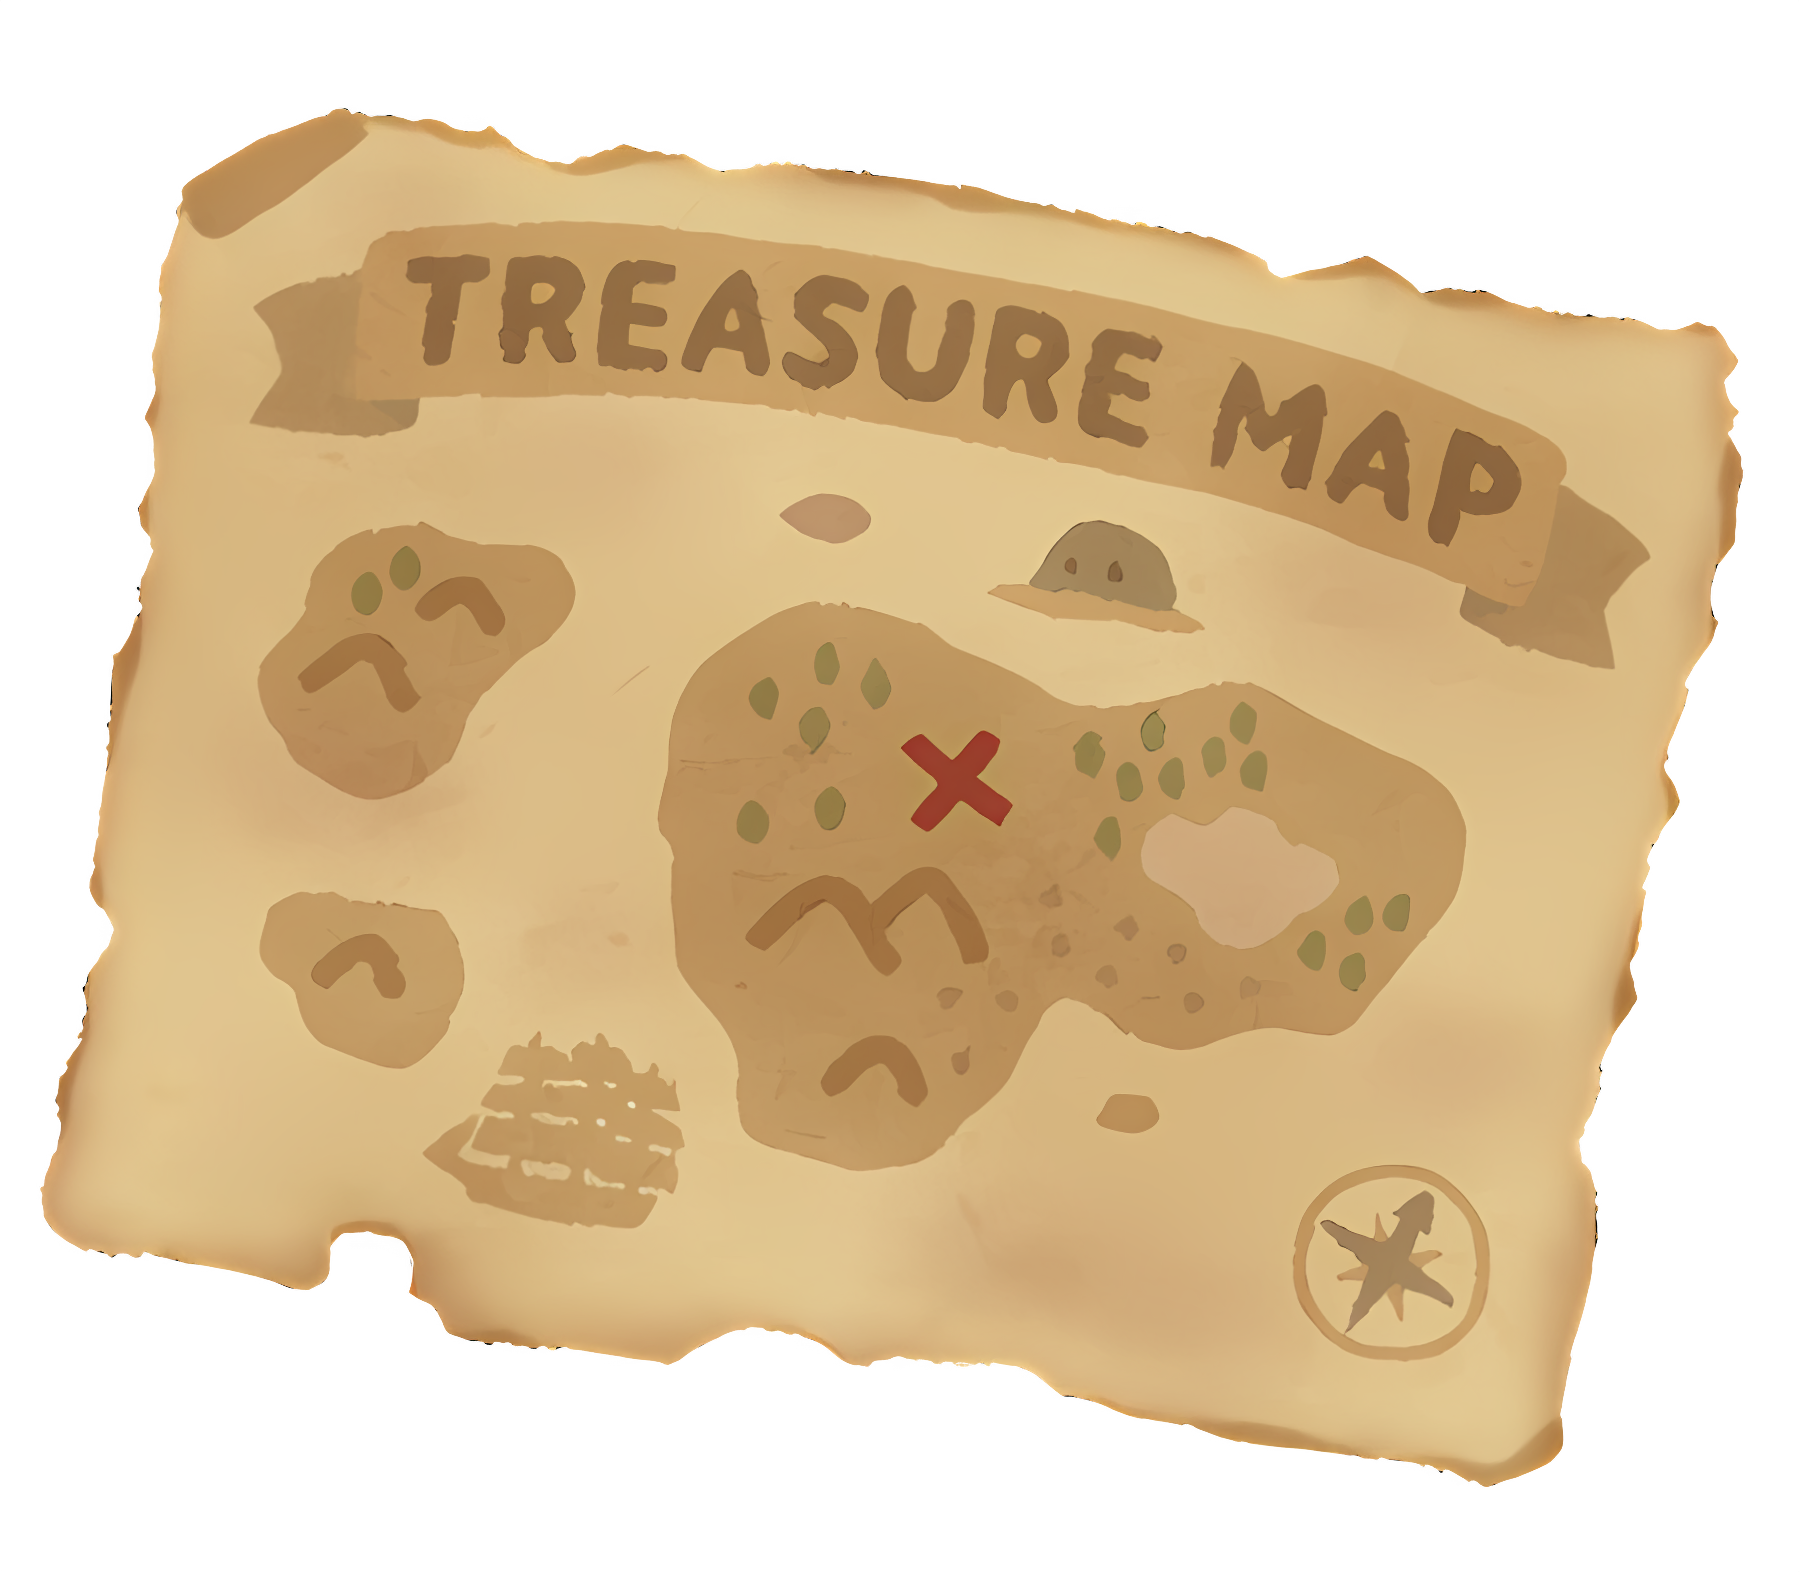 Ancient treasure map on paper with drawings Clipart